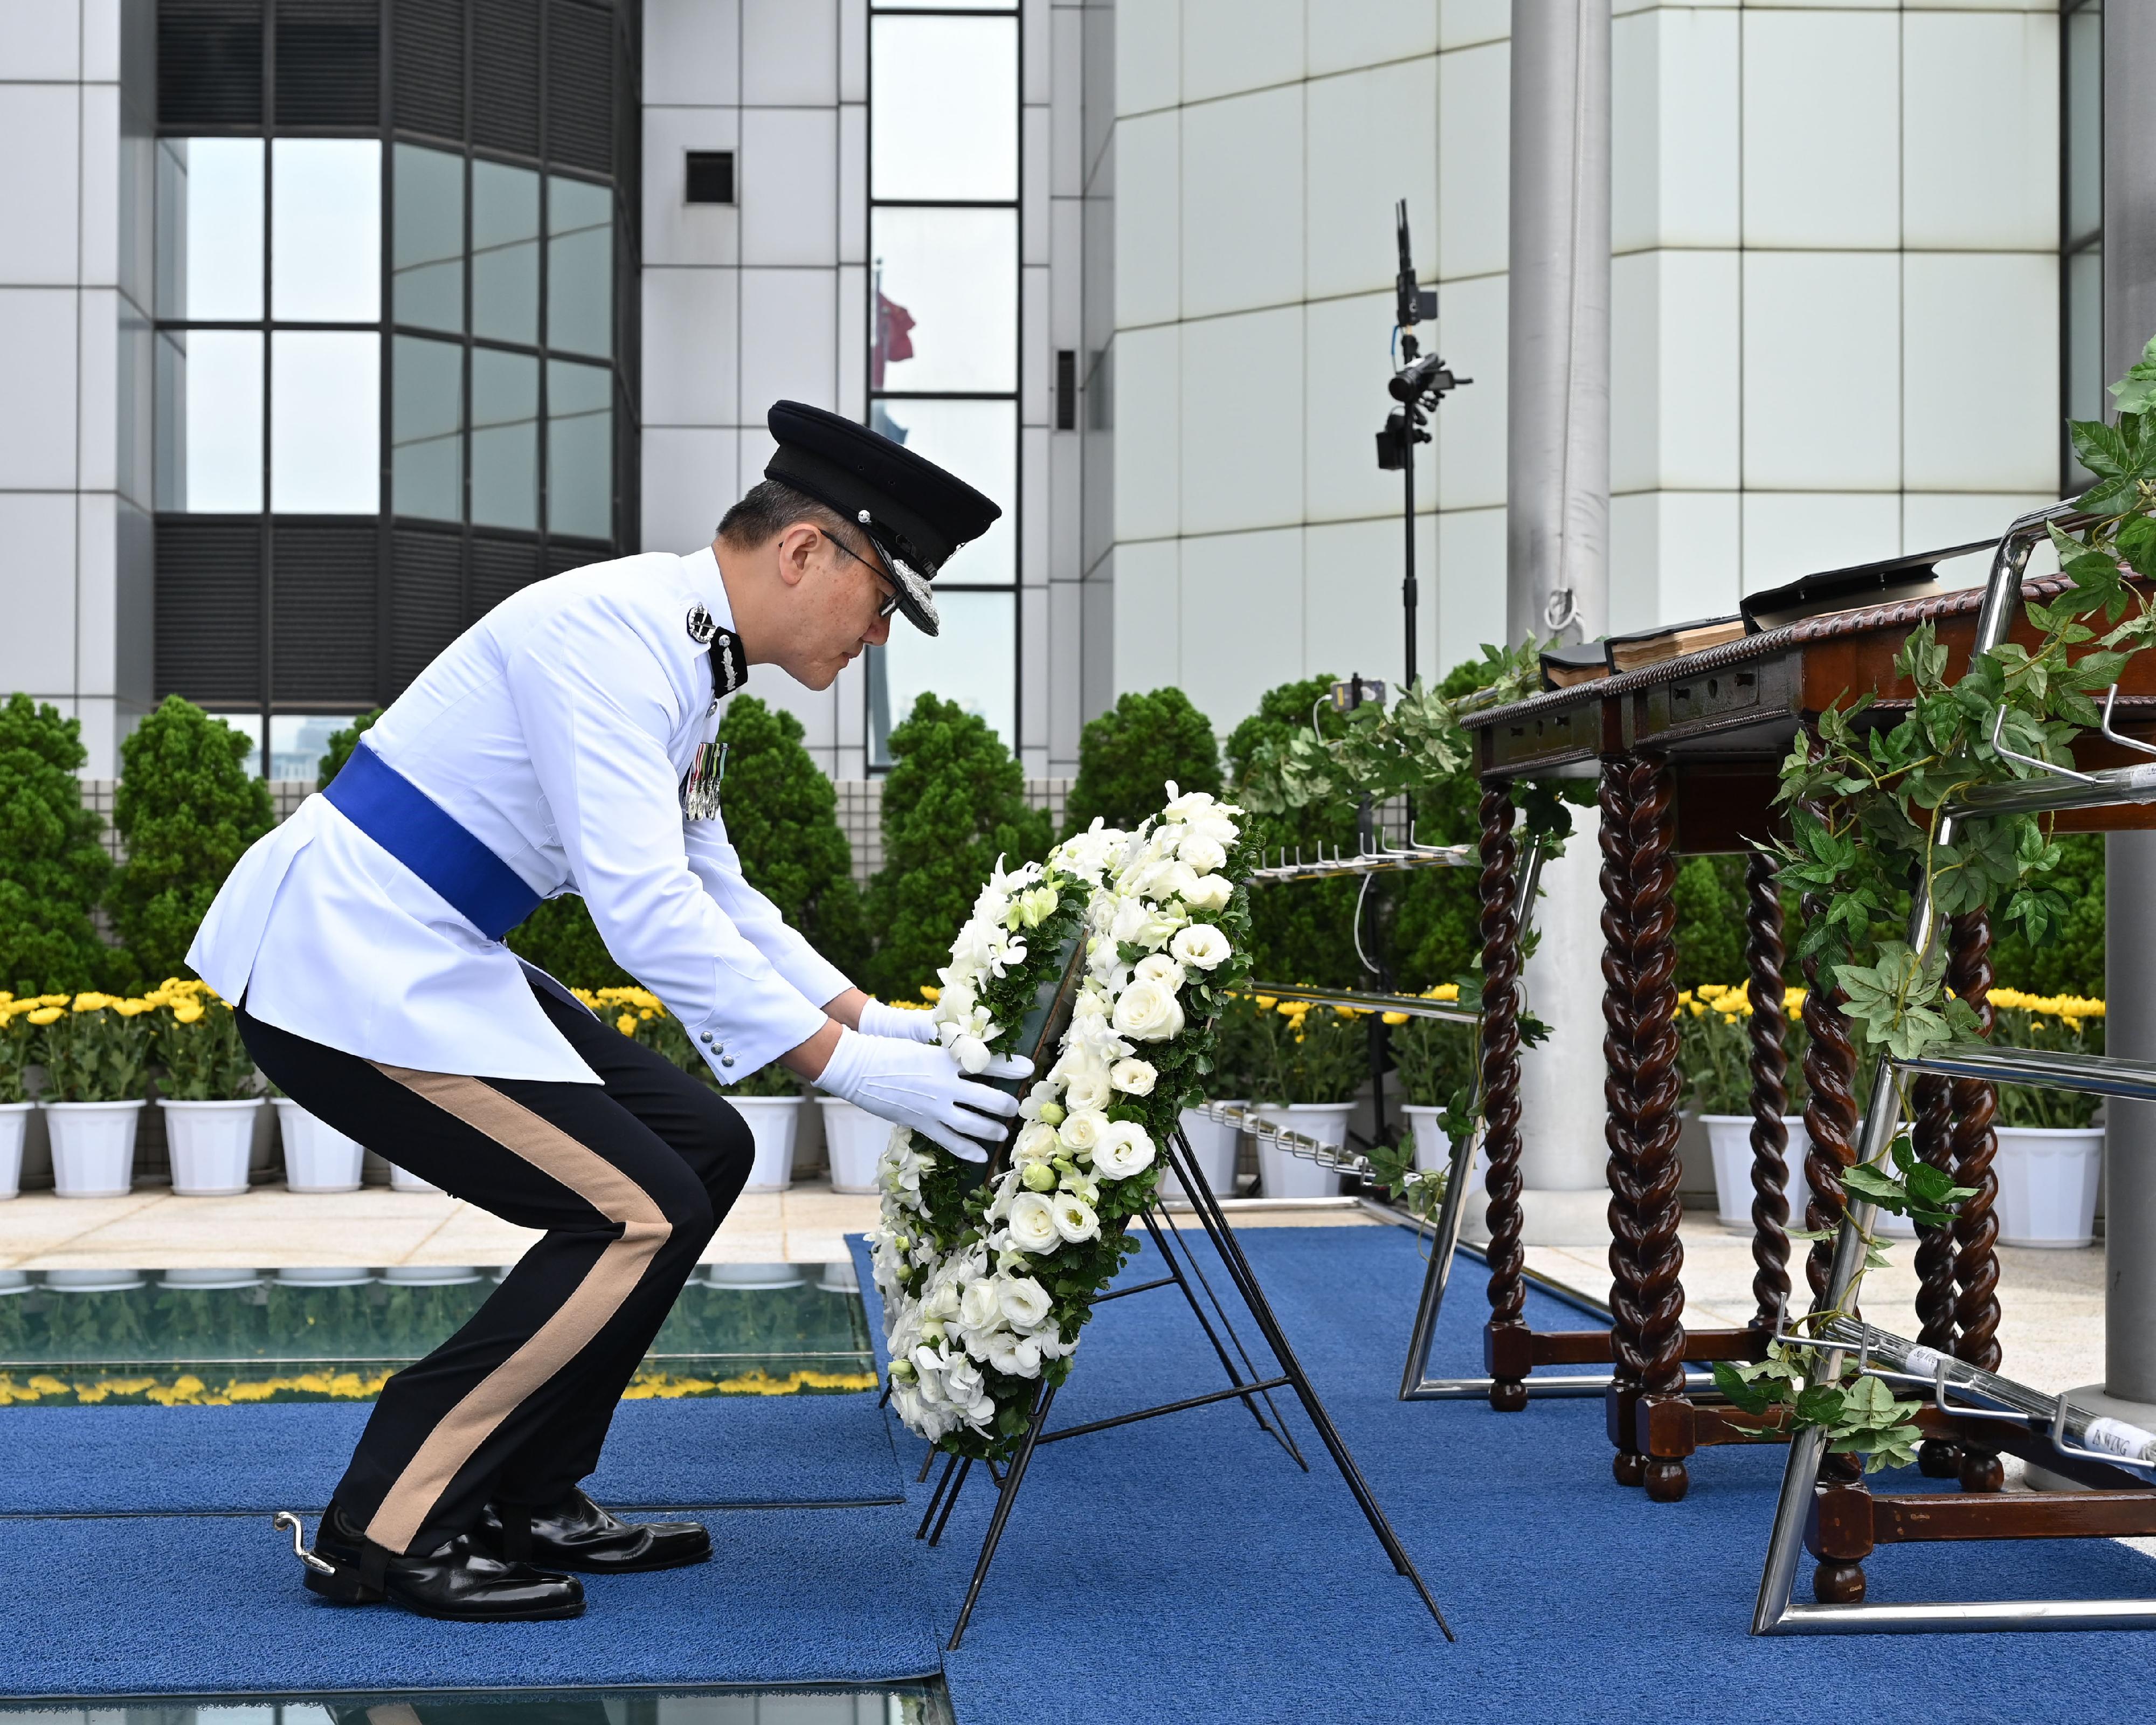 The Hong Kong Police Force holds a ceremony at the Police Headquarters this morning (November 10) to pay tribute to members of the Hong Kong Police Force and Hong Kong Auxiliary Police Force who have given their lives in the line of duty. Photo shows the Commissioner of Police, Mr Siu Chak-yee, laying a wreath in front of the Books of Remembrance in which the names of the fallen are inscribed.